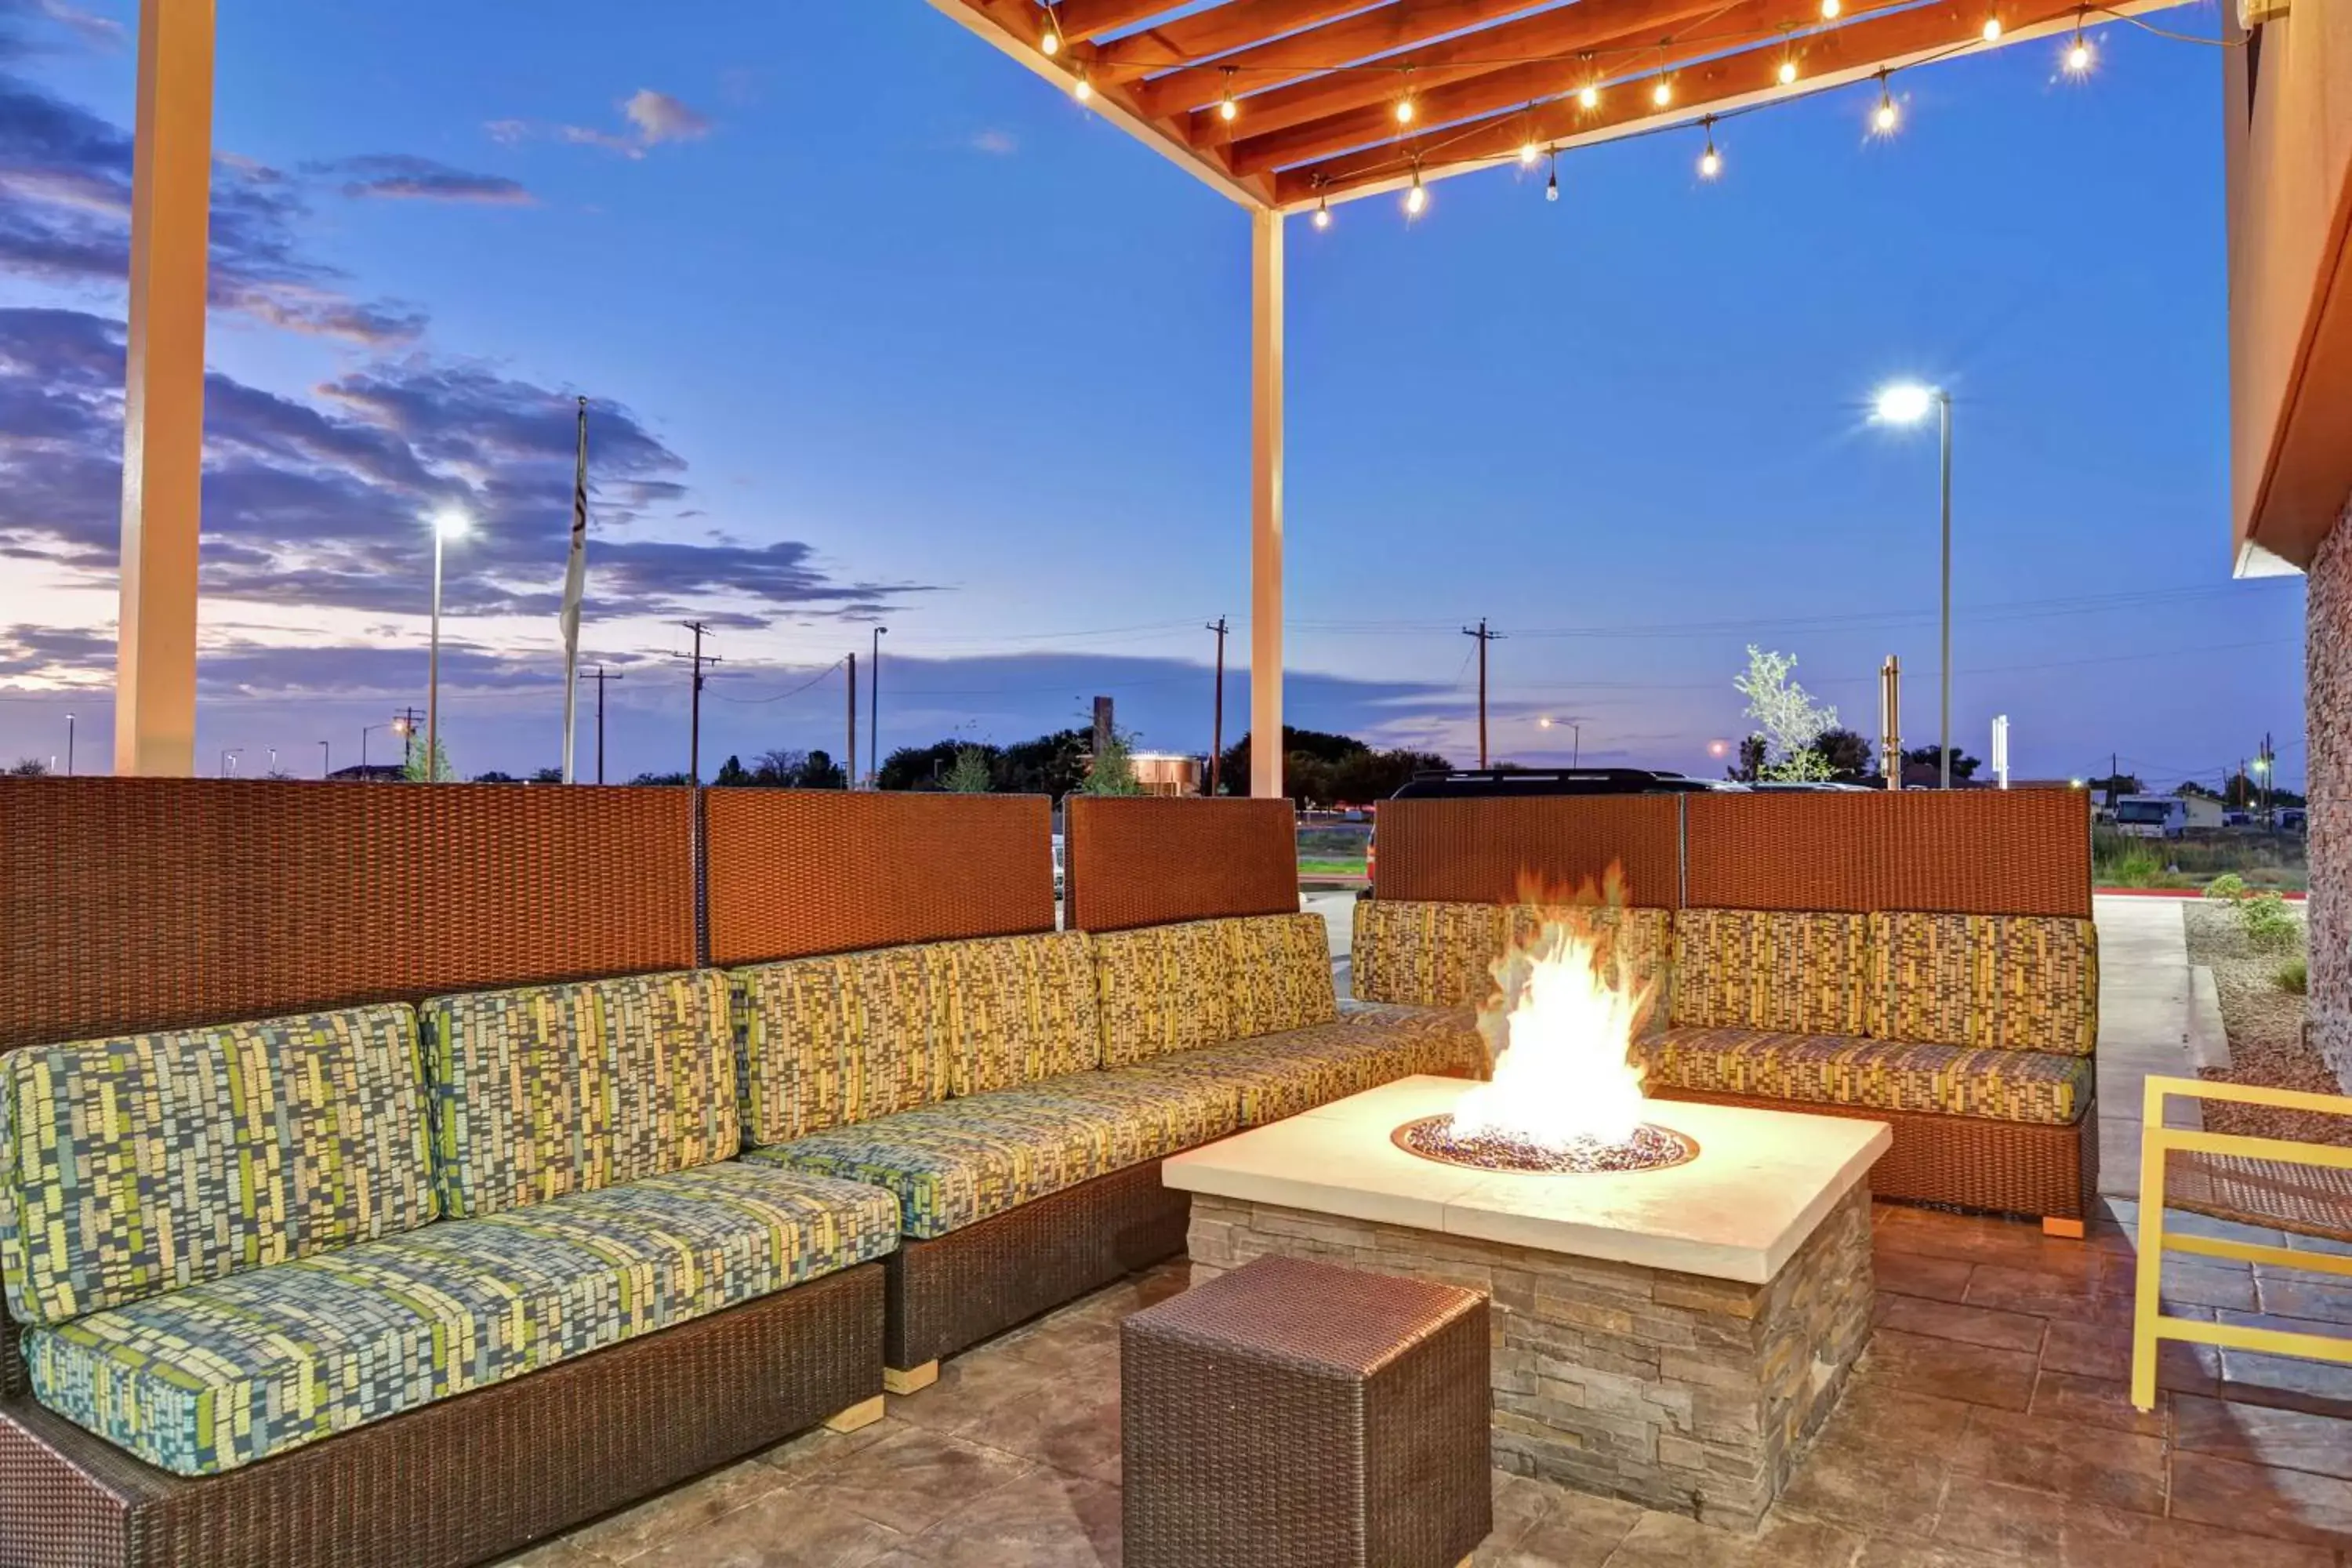 Patio in Home2 Suites By Hilton Pecos Tx